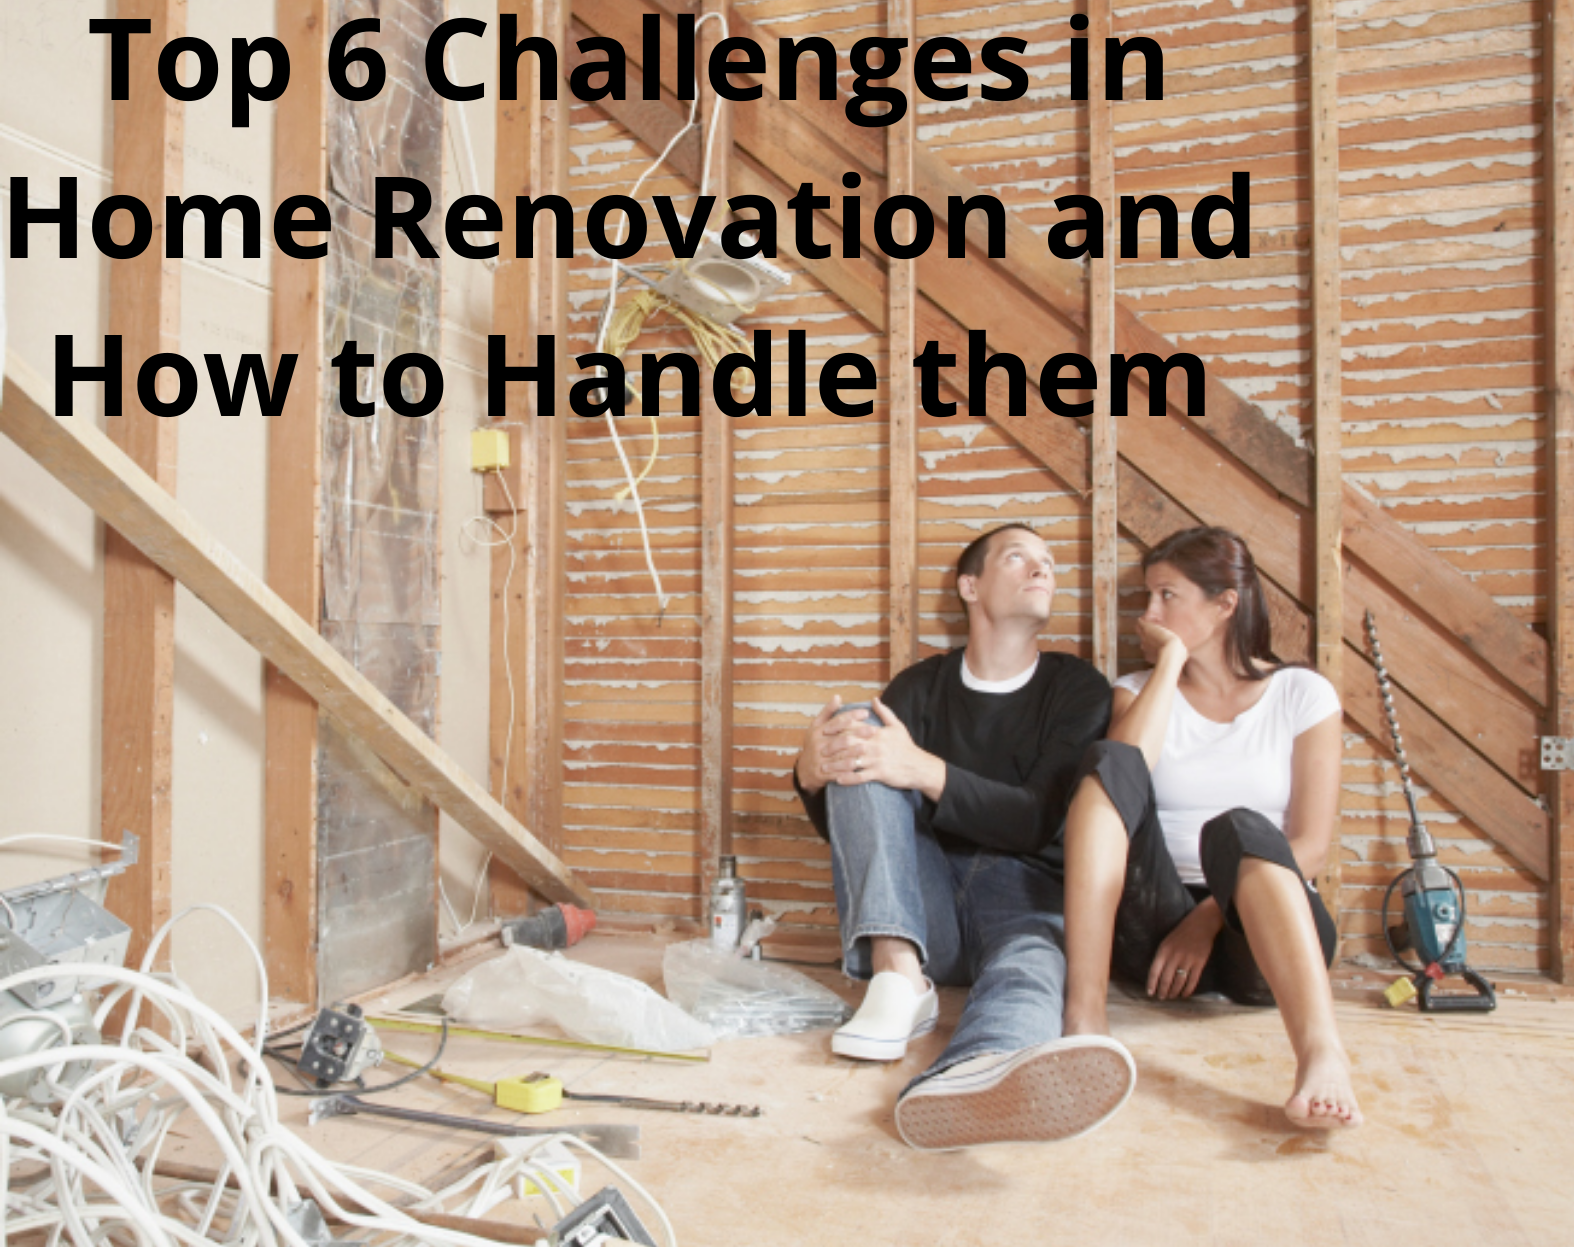 Top 6 Challenges in Home Renovation and How to Handle Them